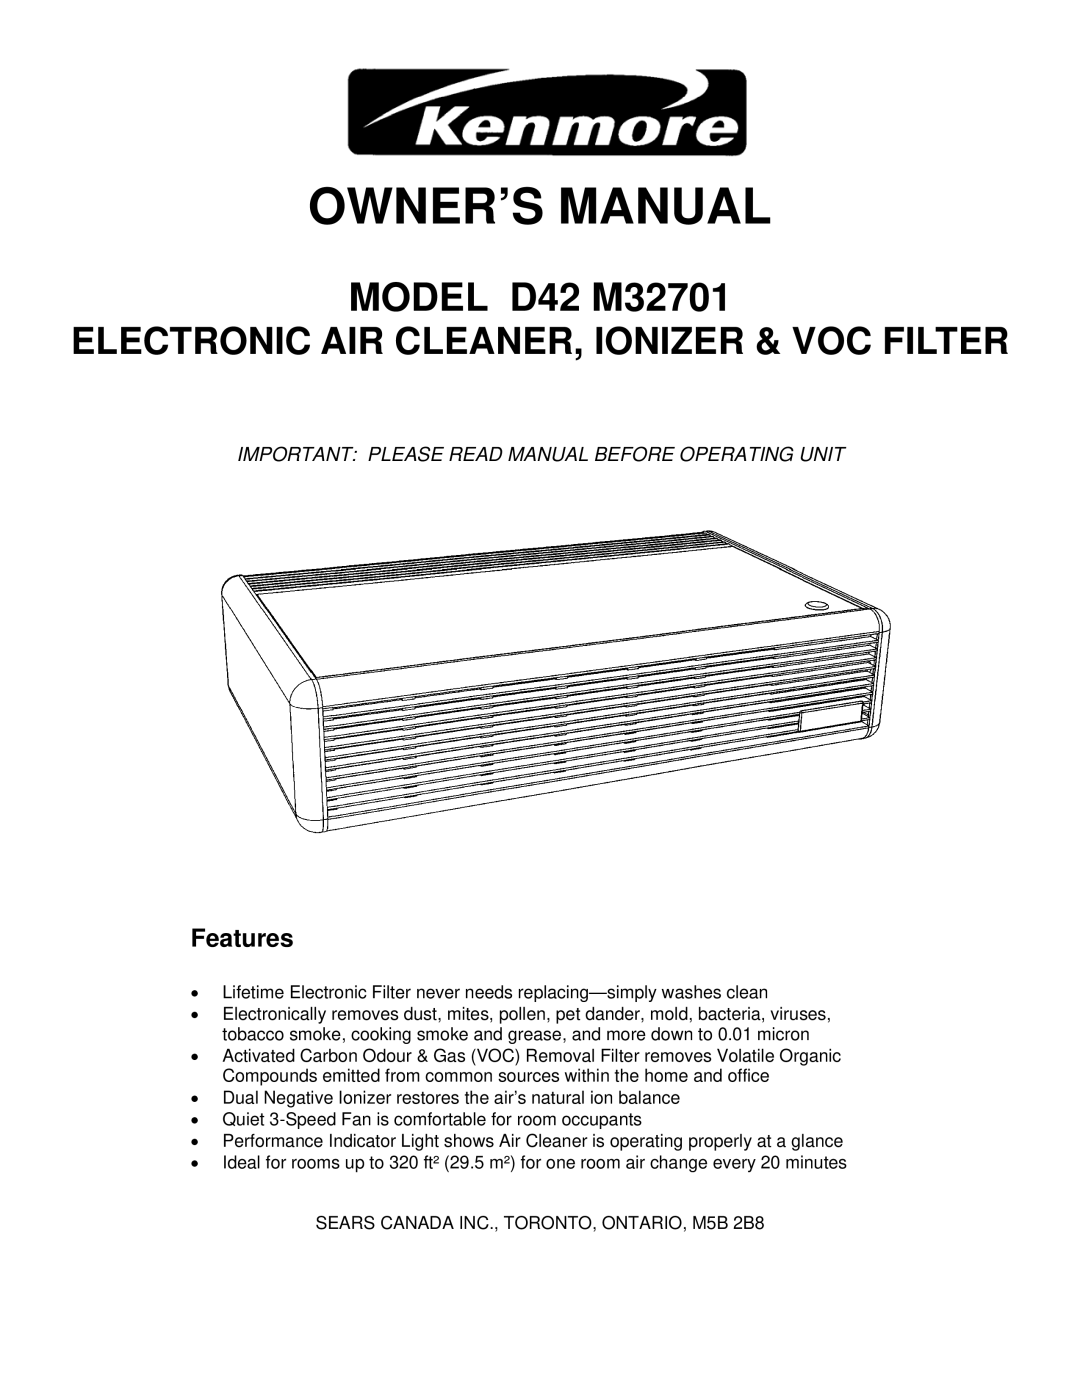 Kenmore owner manual Features, MODEL D42 M32701, Electronic Air Cleaner, Ionizer & Voc Filter 